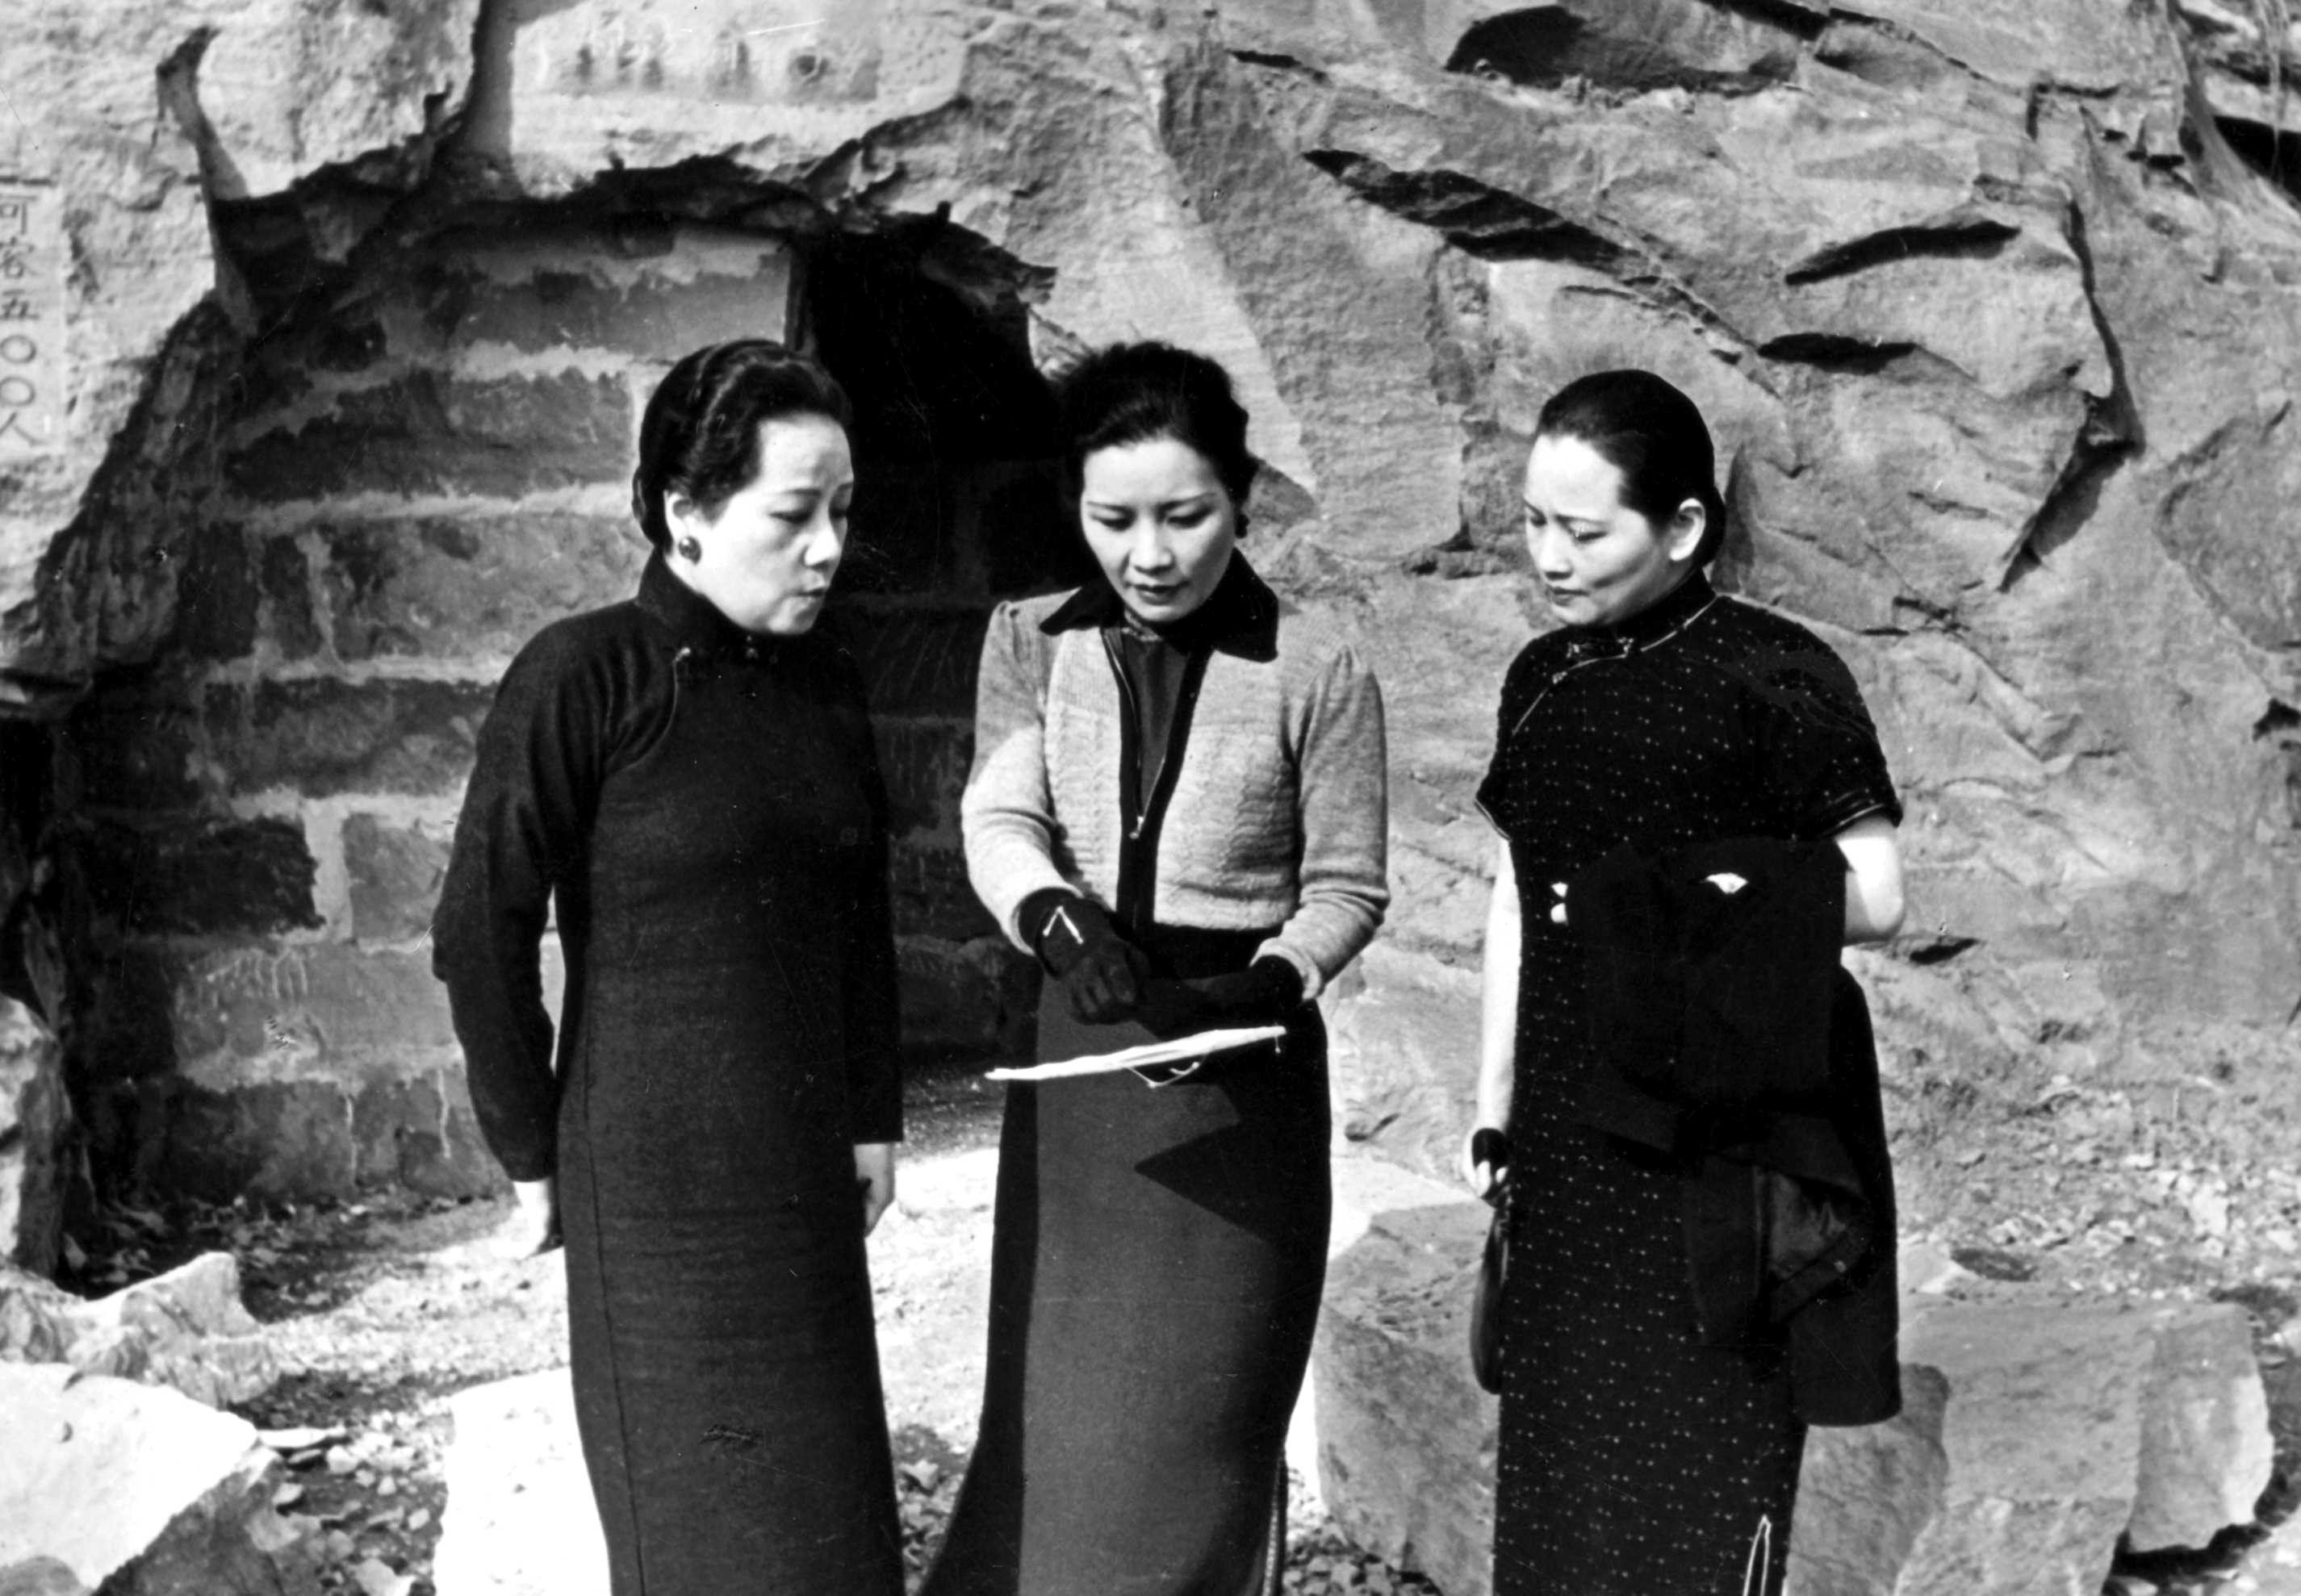 The Soong sisters (from left) Ailing, Meiling and Chingling, in Chongqing, in the 1940s.